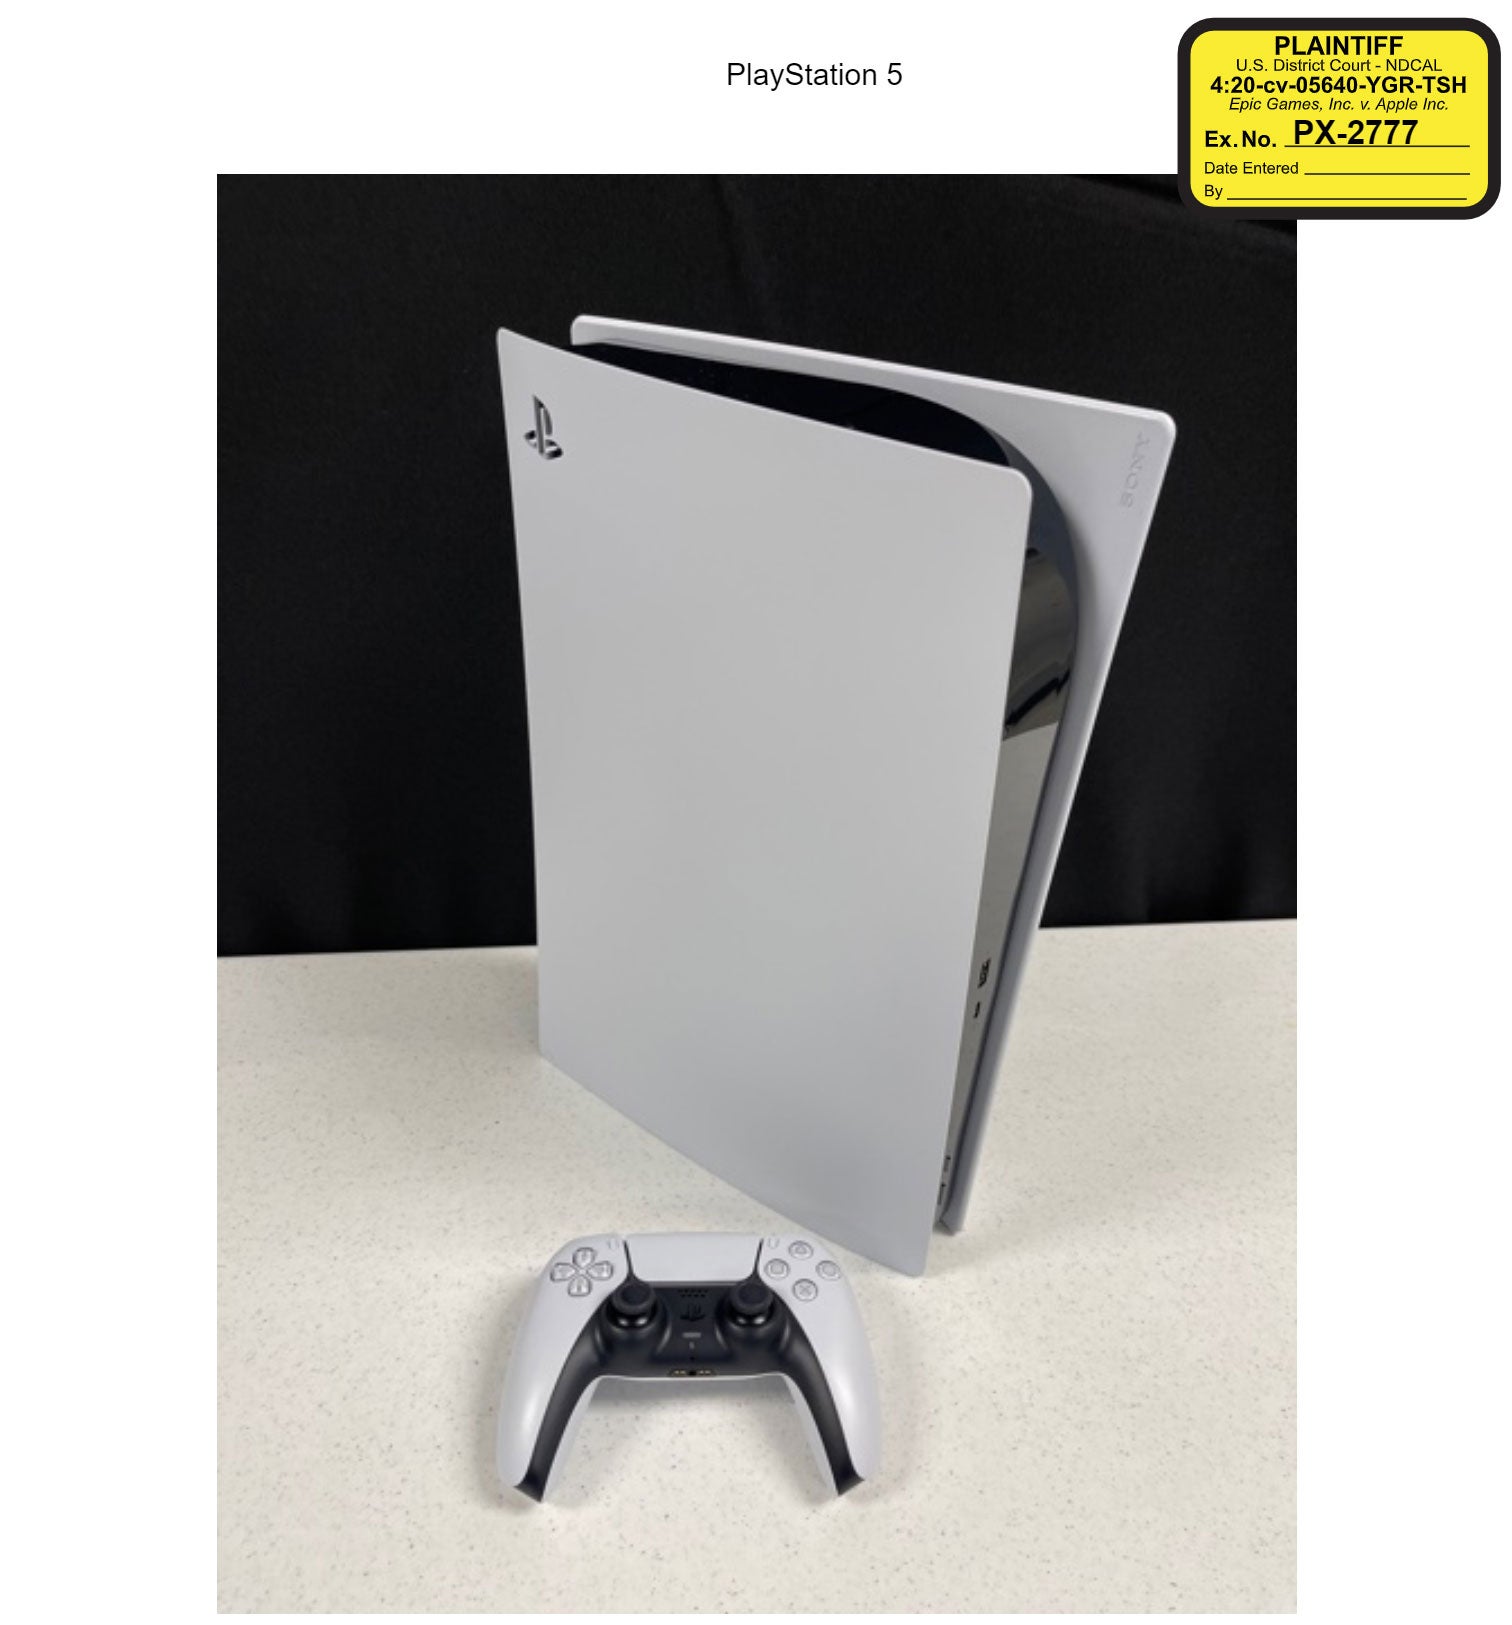 This is the actual PS5 from the case, exhibit PX-2777. No word on whether it was won in a raffle or bought on resale. (Photo: Epic vs Apple)